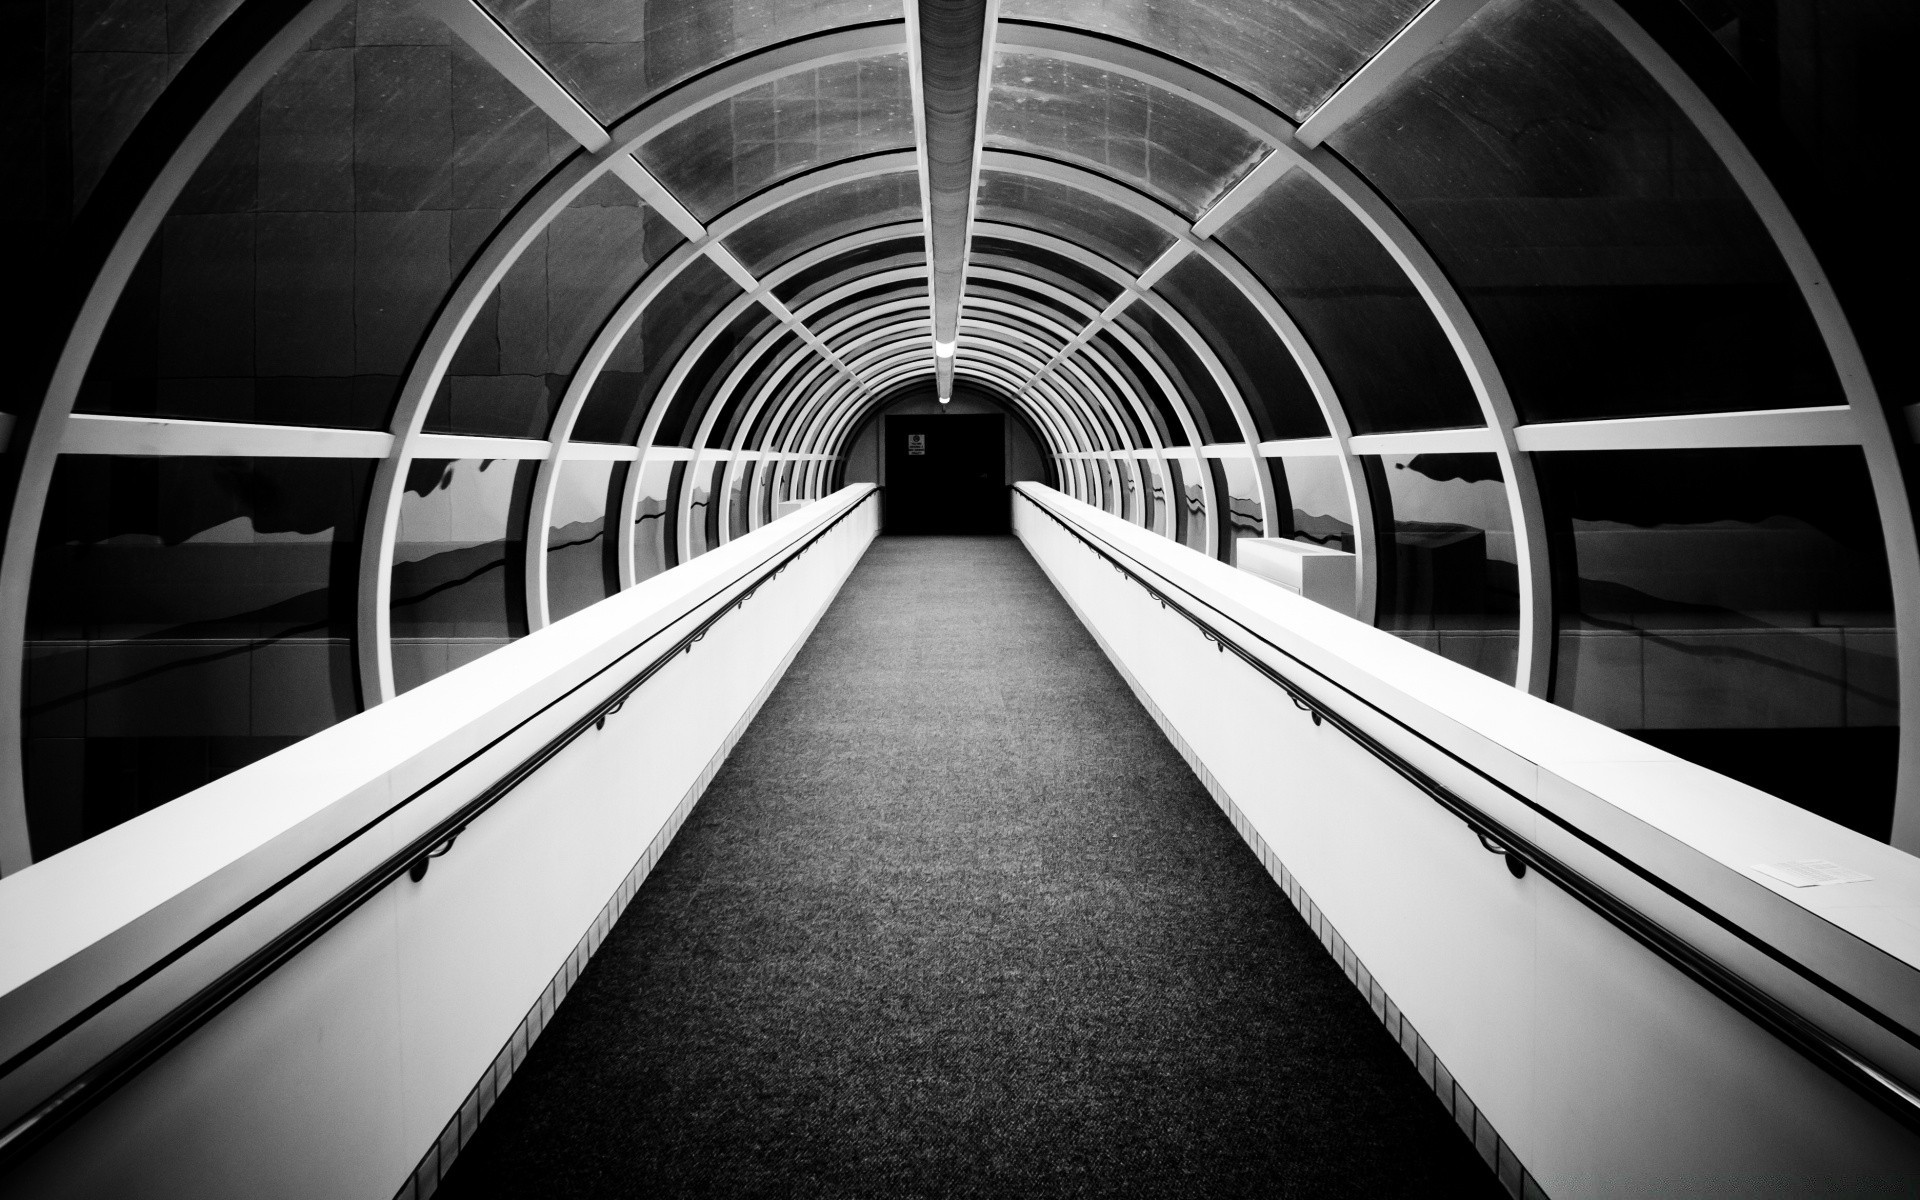 black and white tube monochrome tunnel airport step transportation system street perspective escalator light guidance reflection modern train city car fast urban